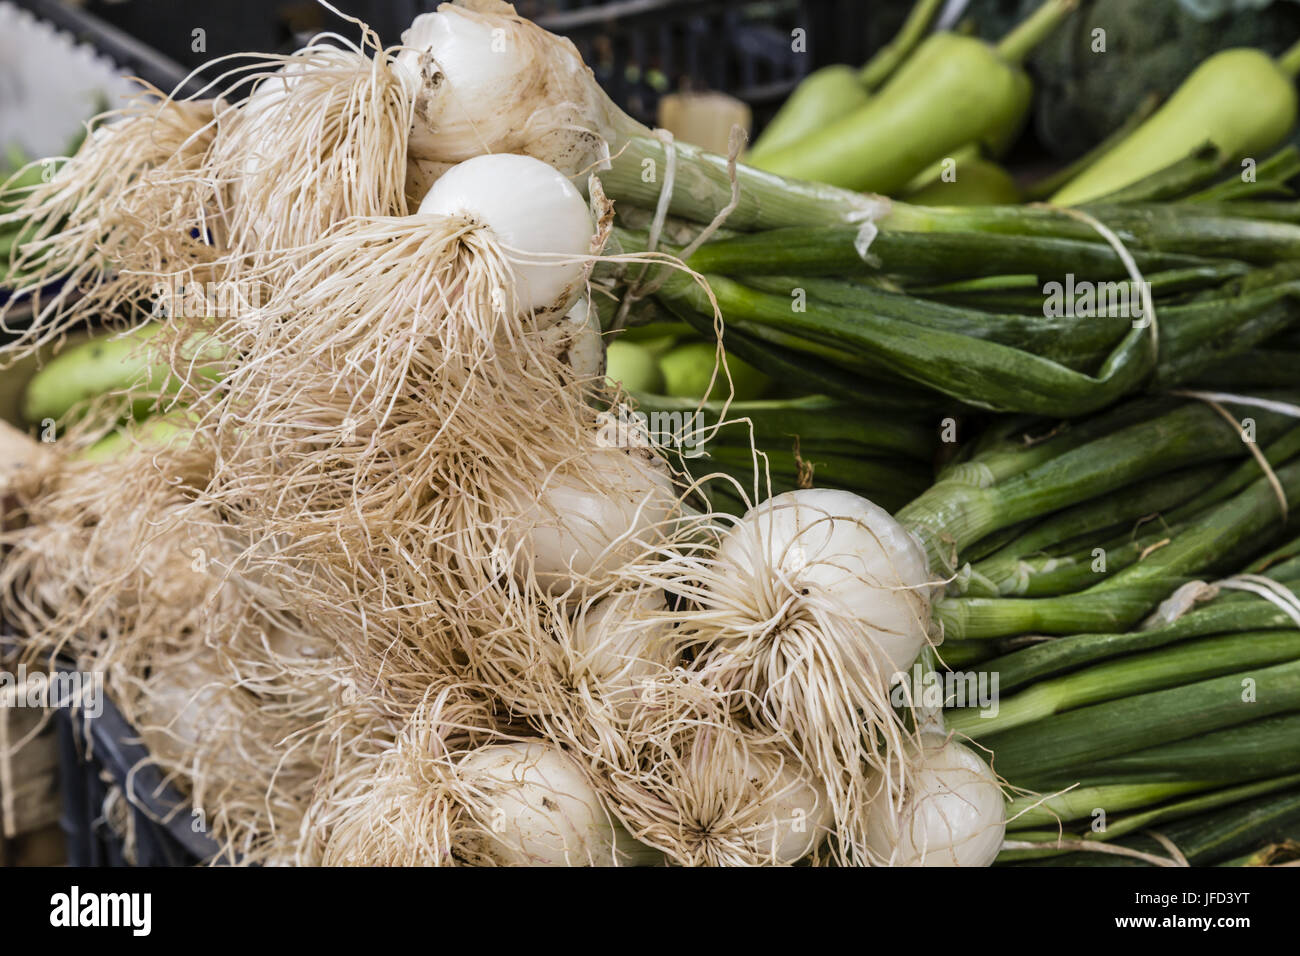 spring onions on the market Stock Photo